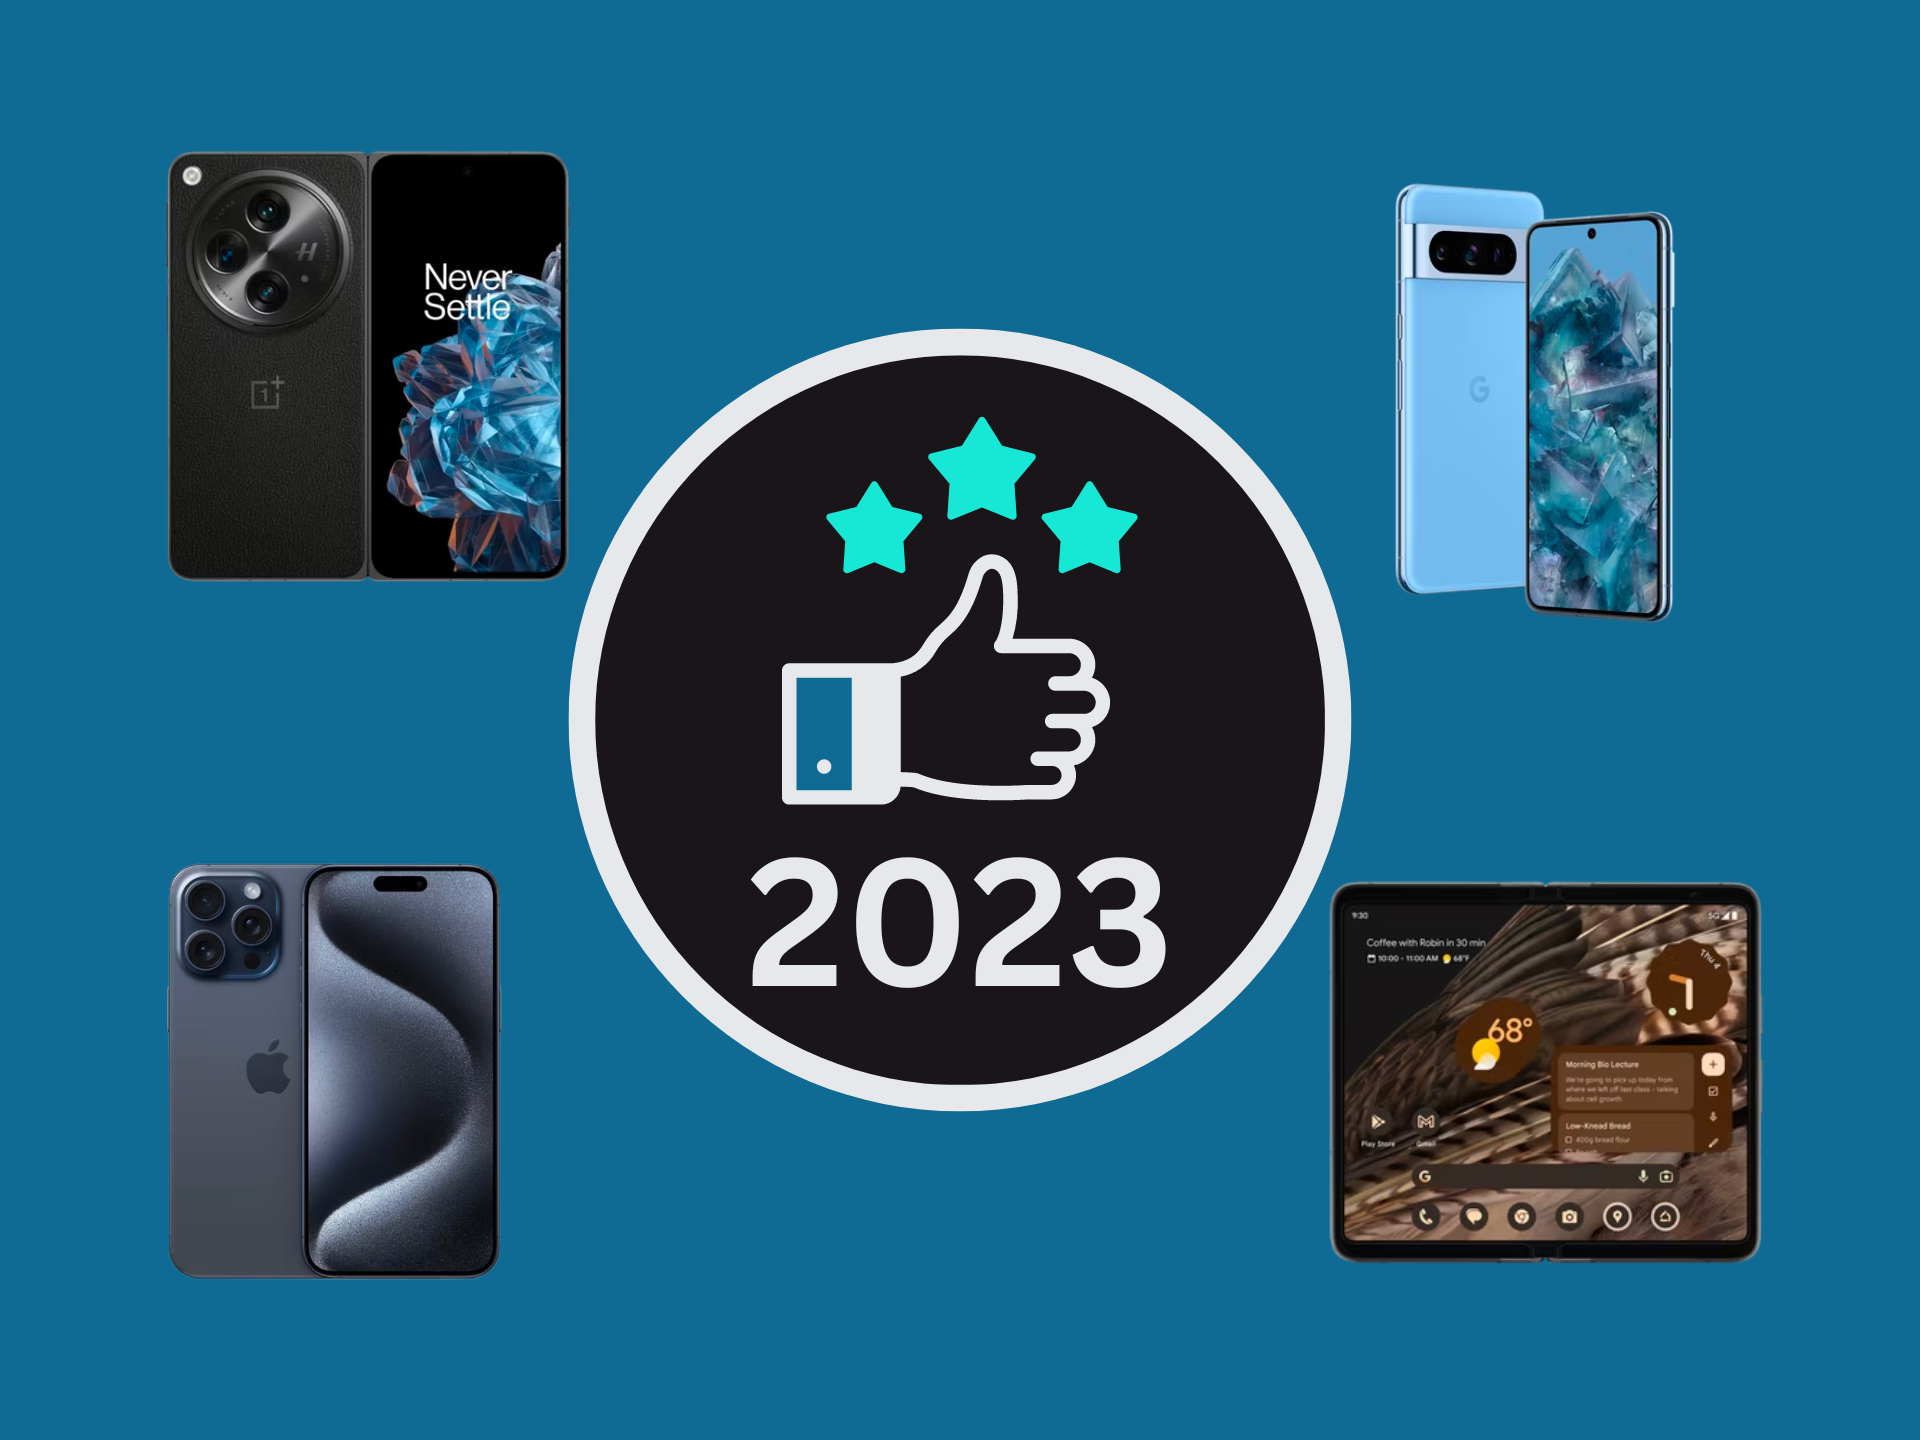 li-2023 was a great year for smartphones